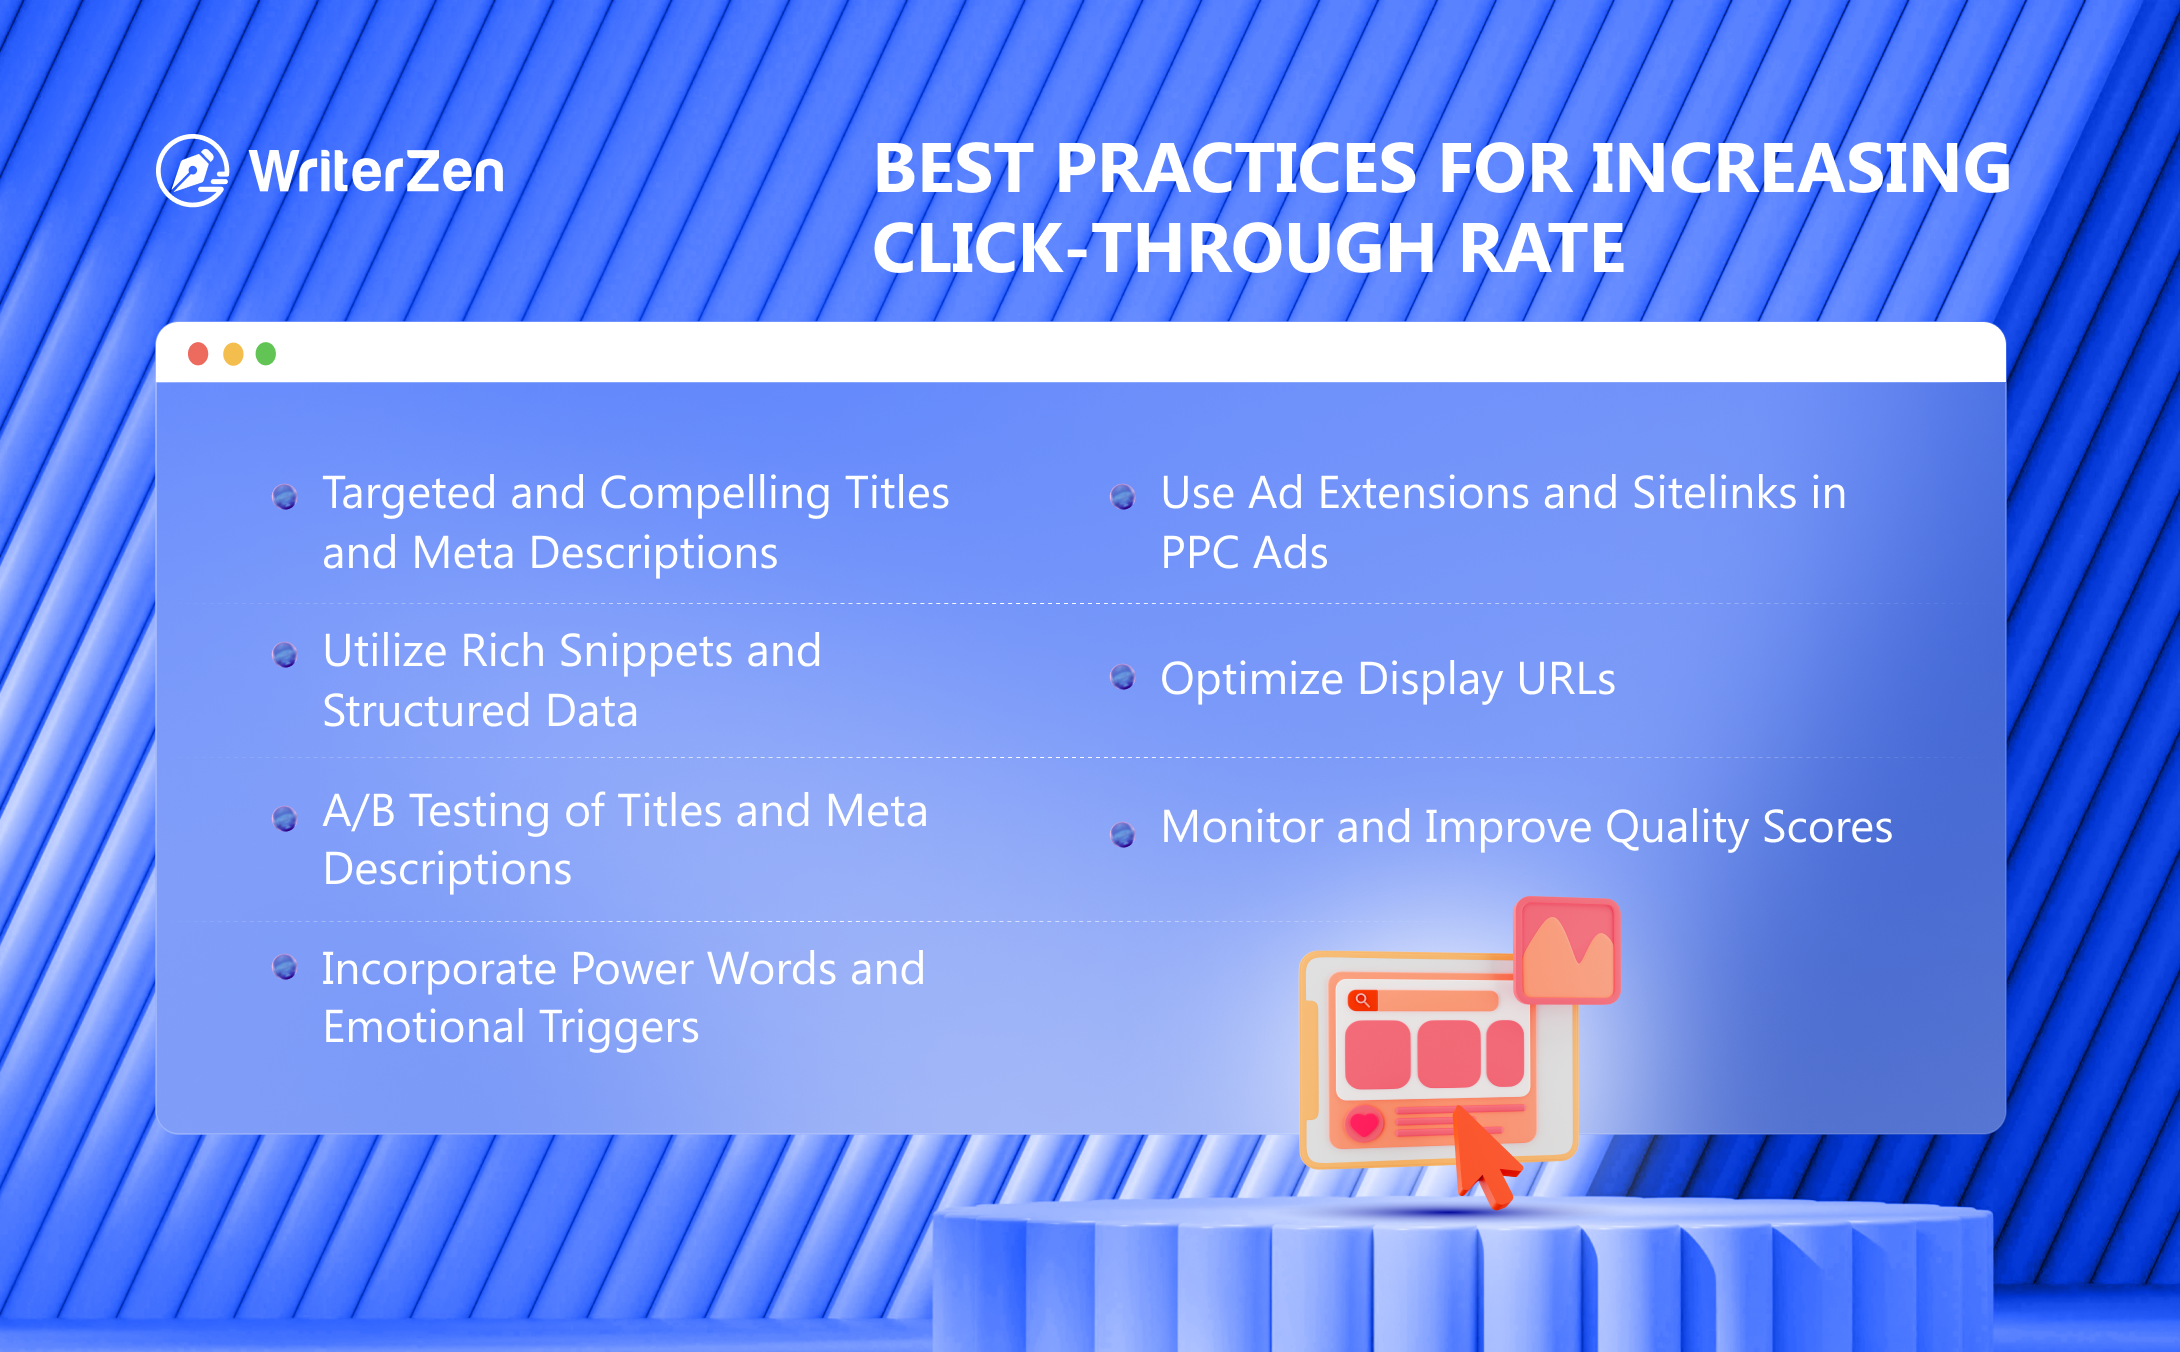 Best Practices for Increasing Click-Through Rate